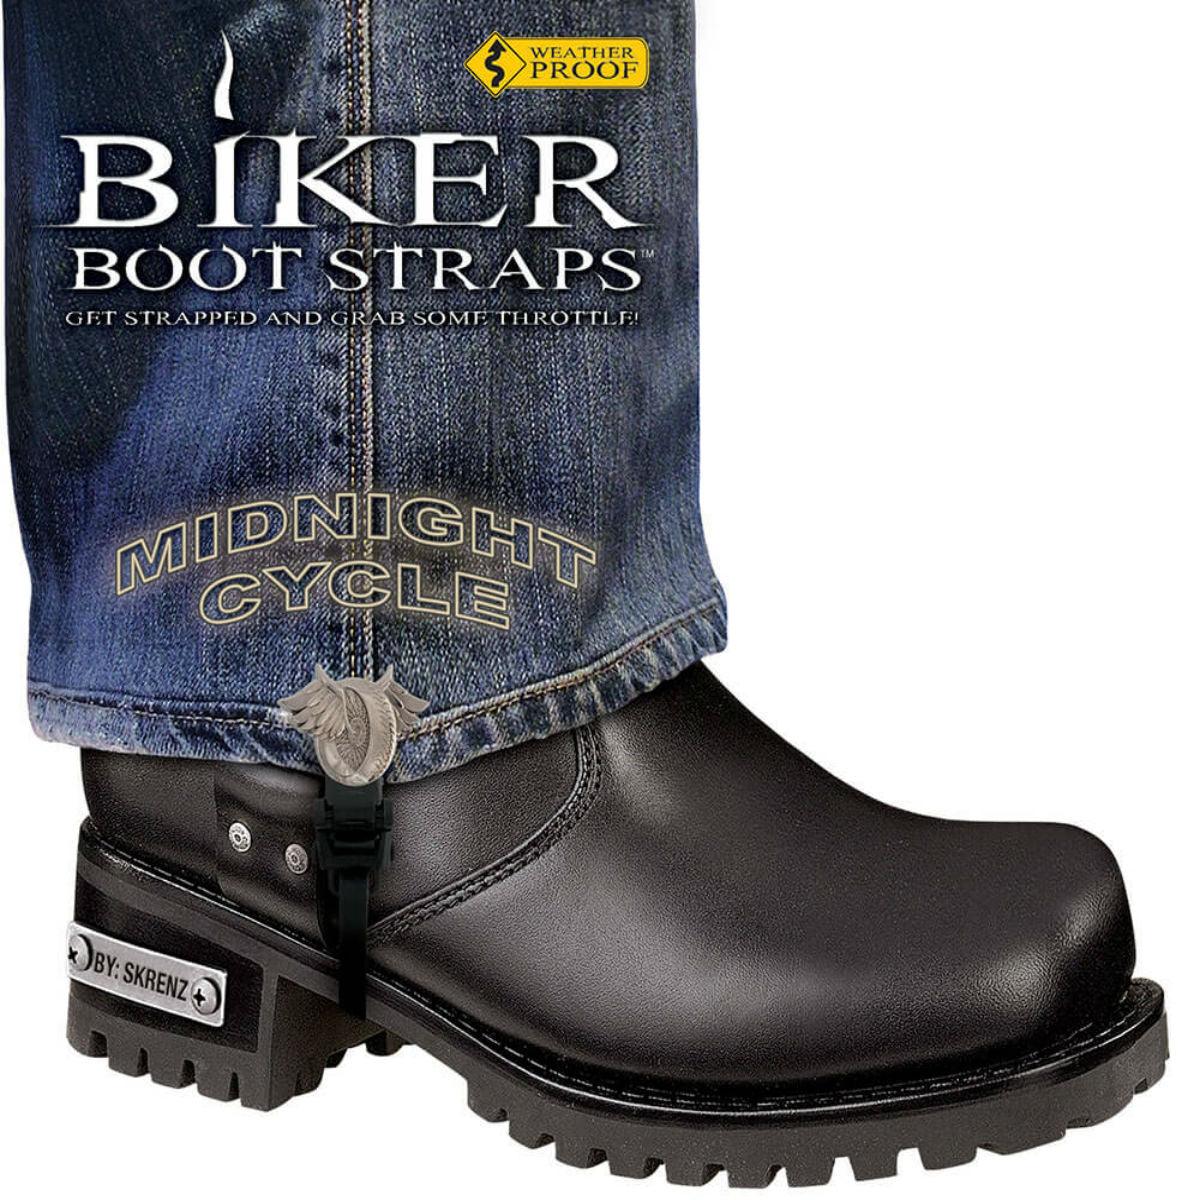 Daniel Smart Weather Proof Boot Straps, Midnight Cycle, 6 in - American Legend Rider